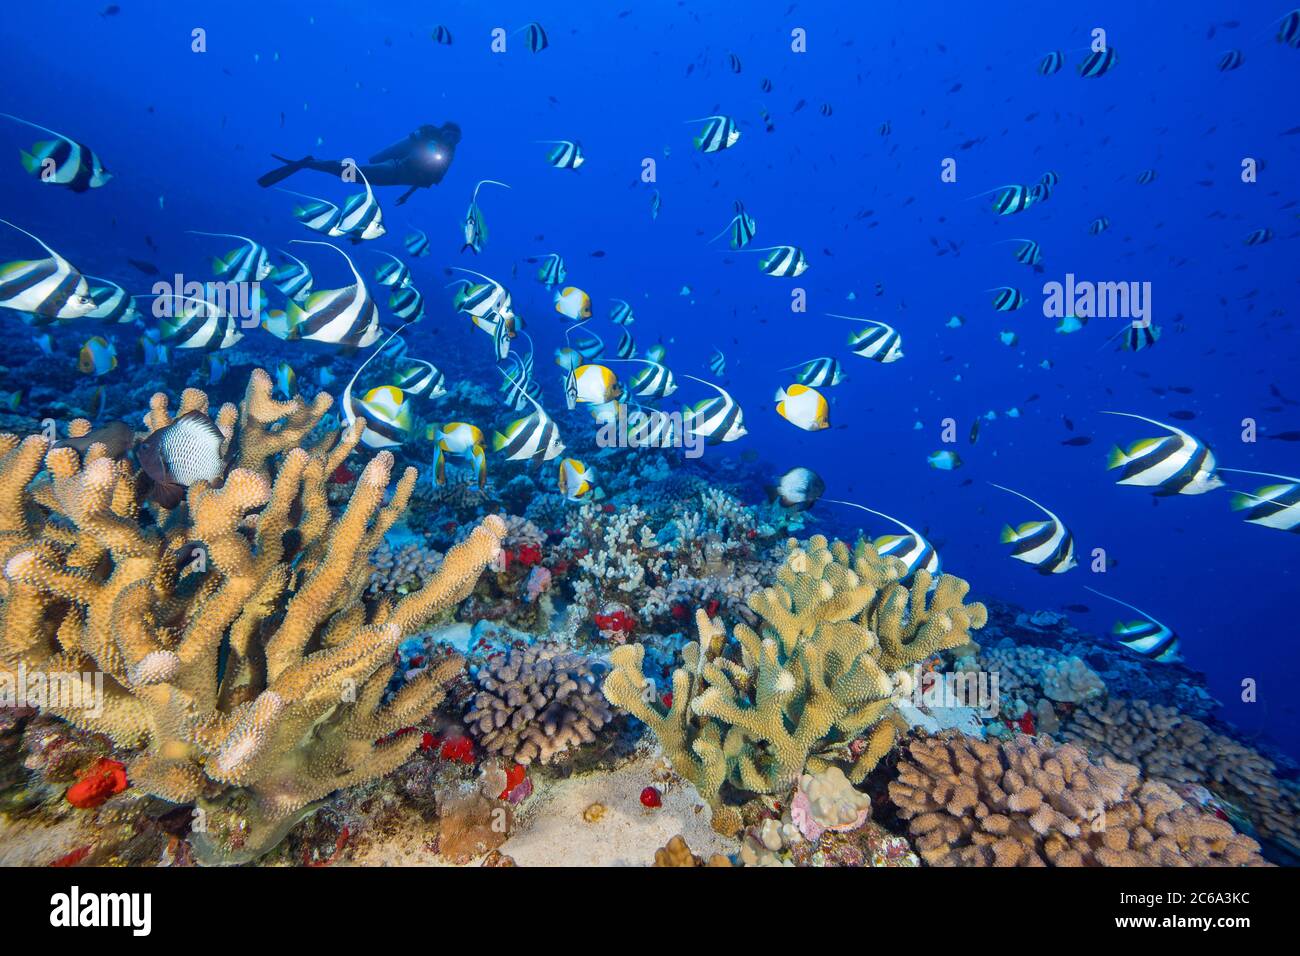 Antler coral, schooling bannerfish and pyramid butterflyfish fill this deep reef scene along with a diver (MR), Hawaii. Stock Photo